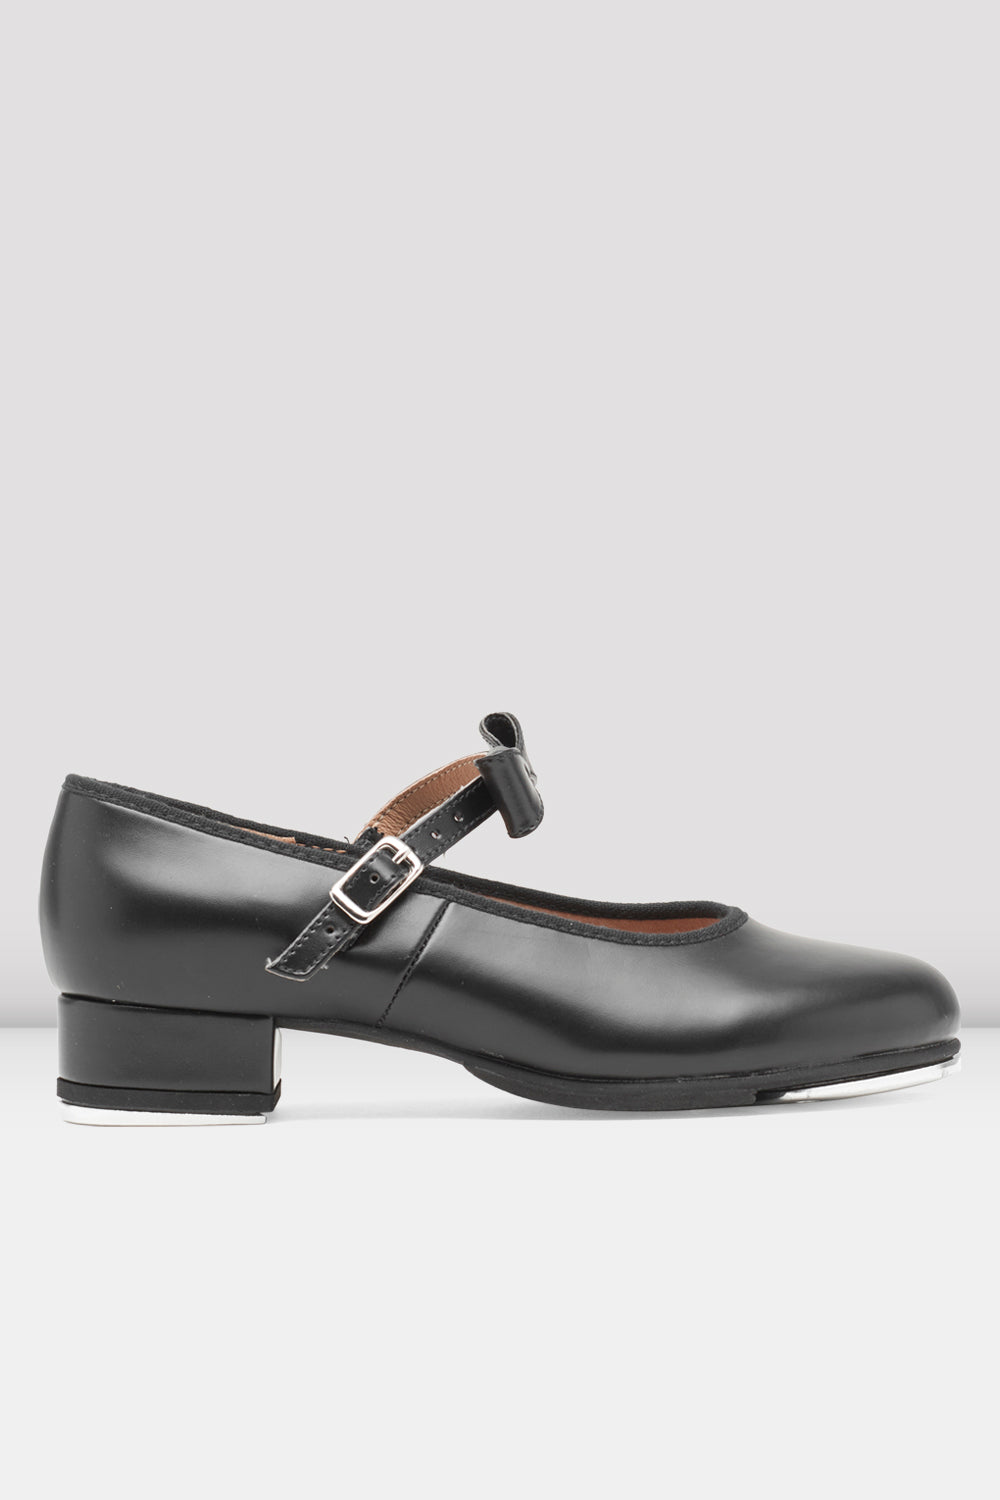 BLOCH Ladies Merry Jane Tap Shoes, Black Synthetic Leather